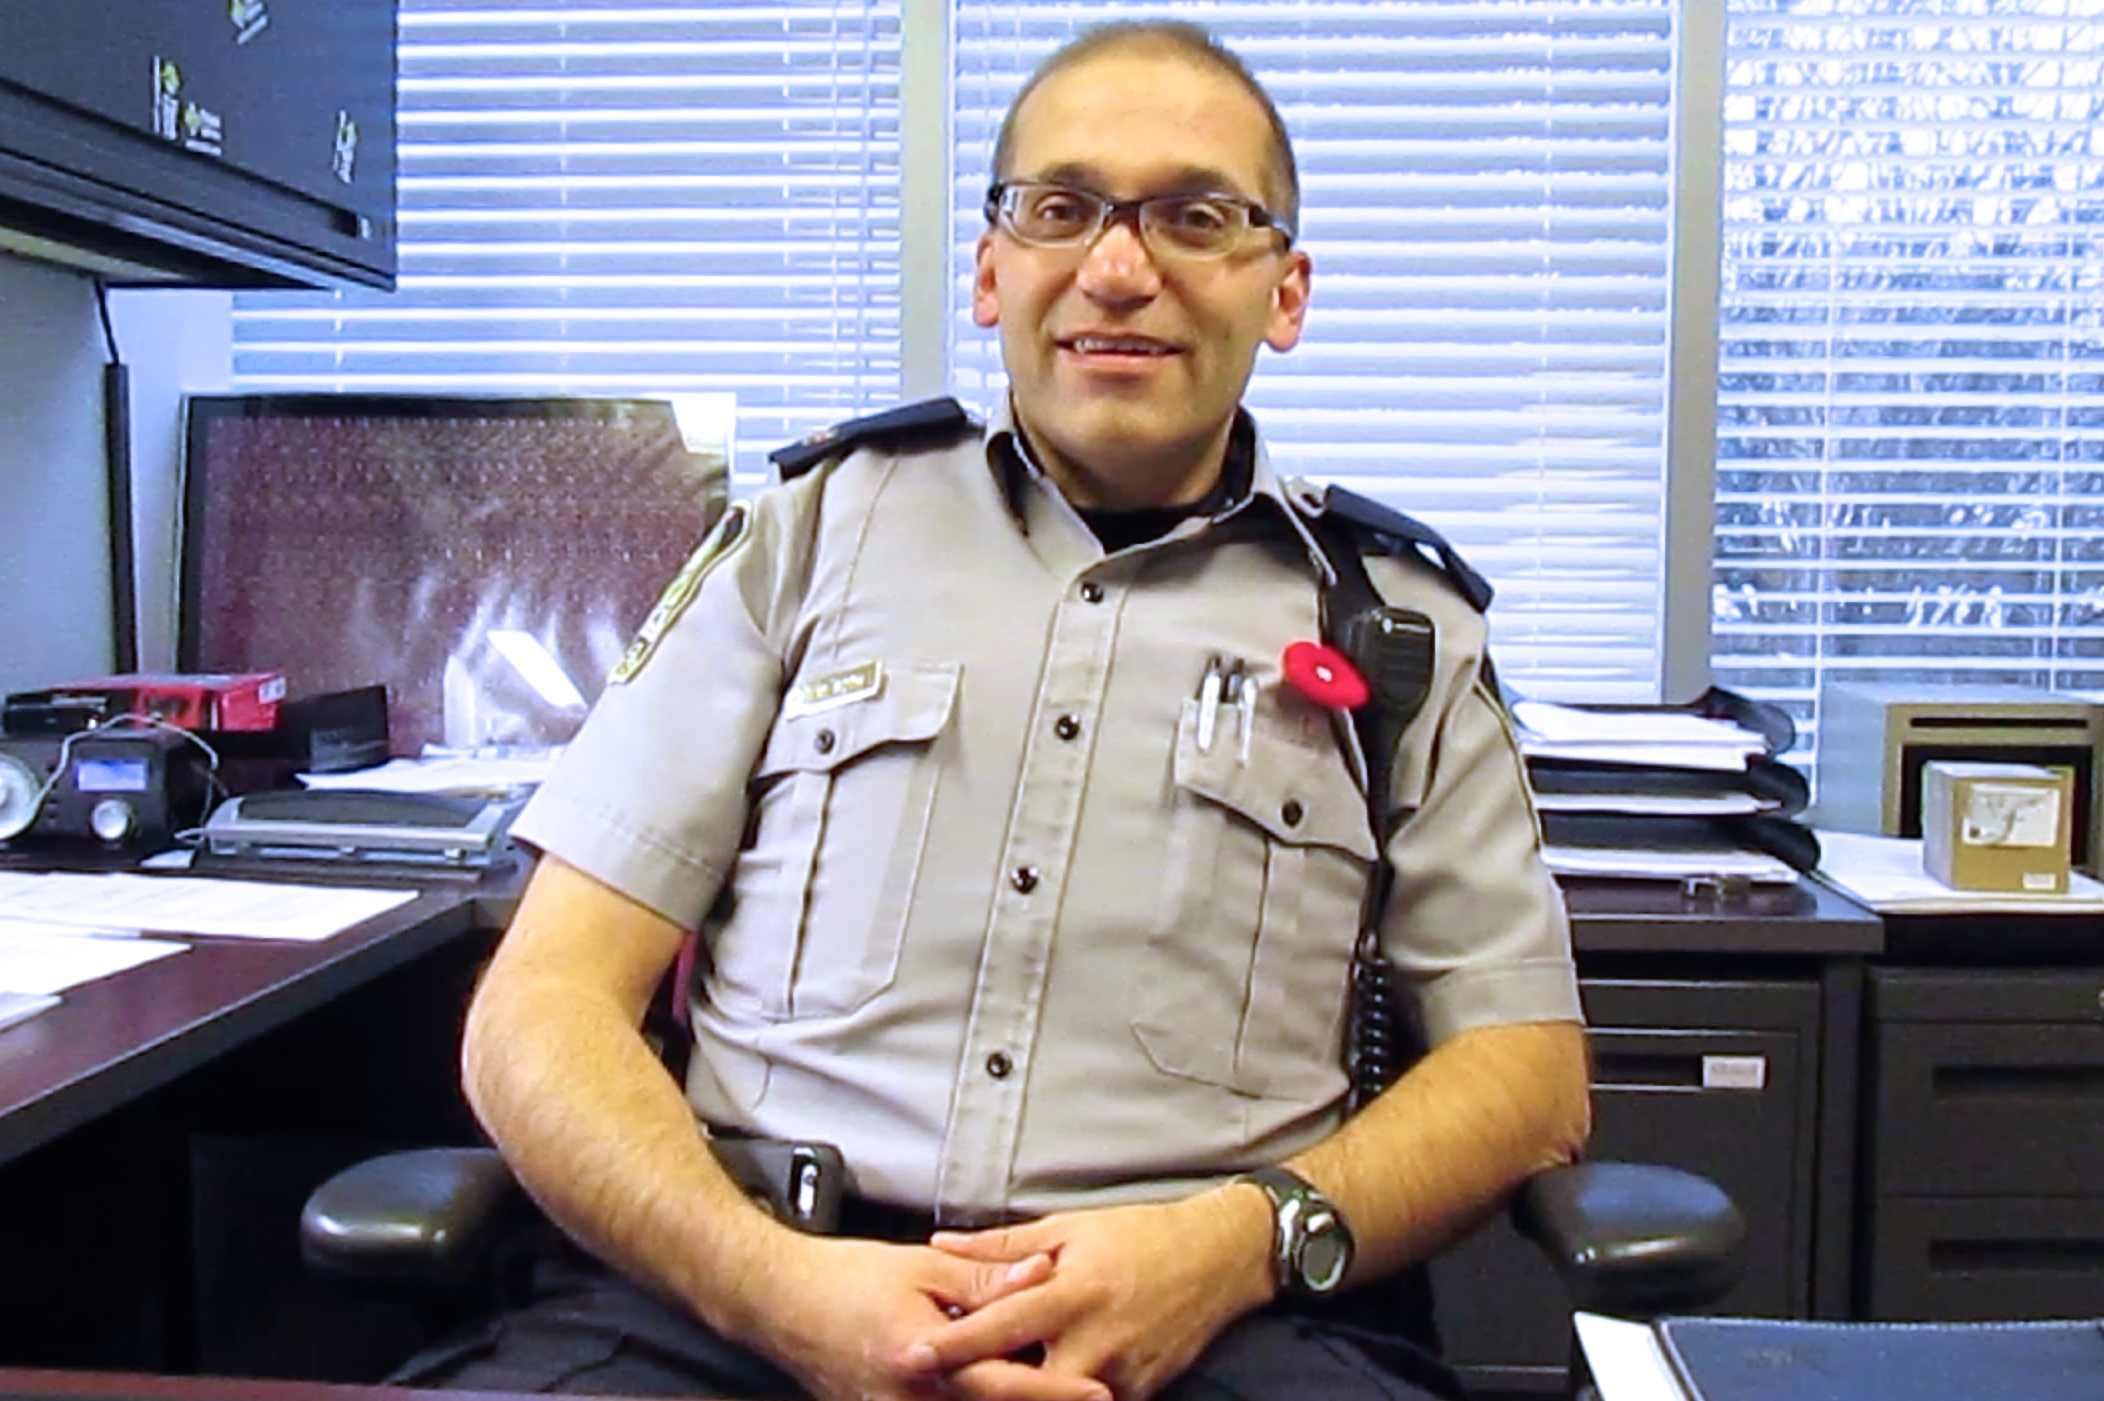 In his almost 25 year career, Sgt. Marcel Roth now takes care of the administrative side of University of Alberta Protective Services (UAPS).